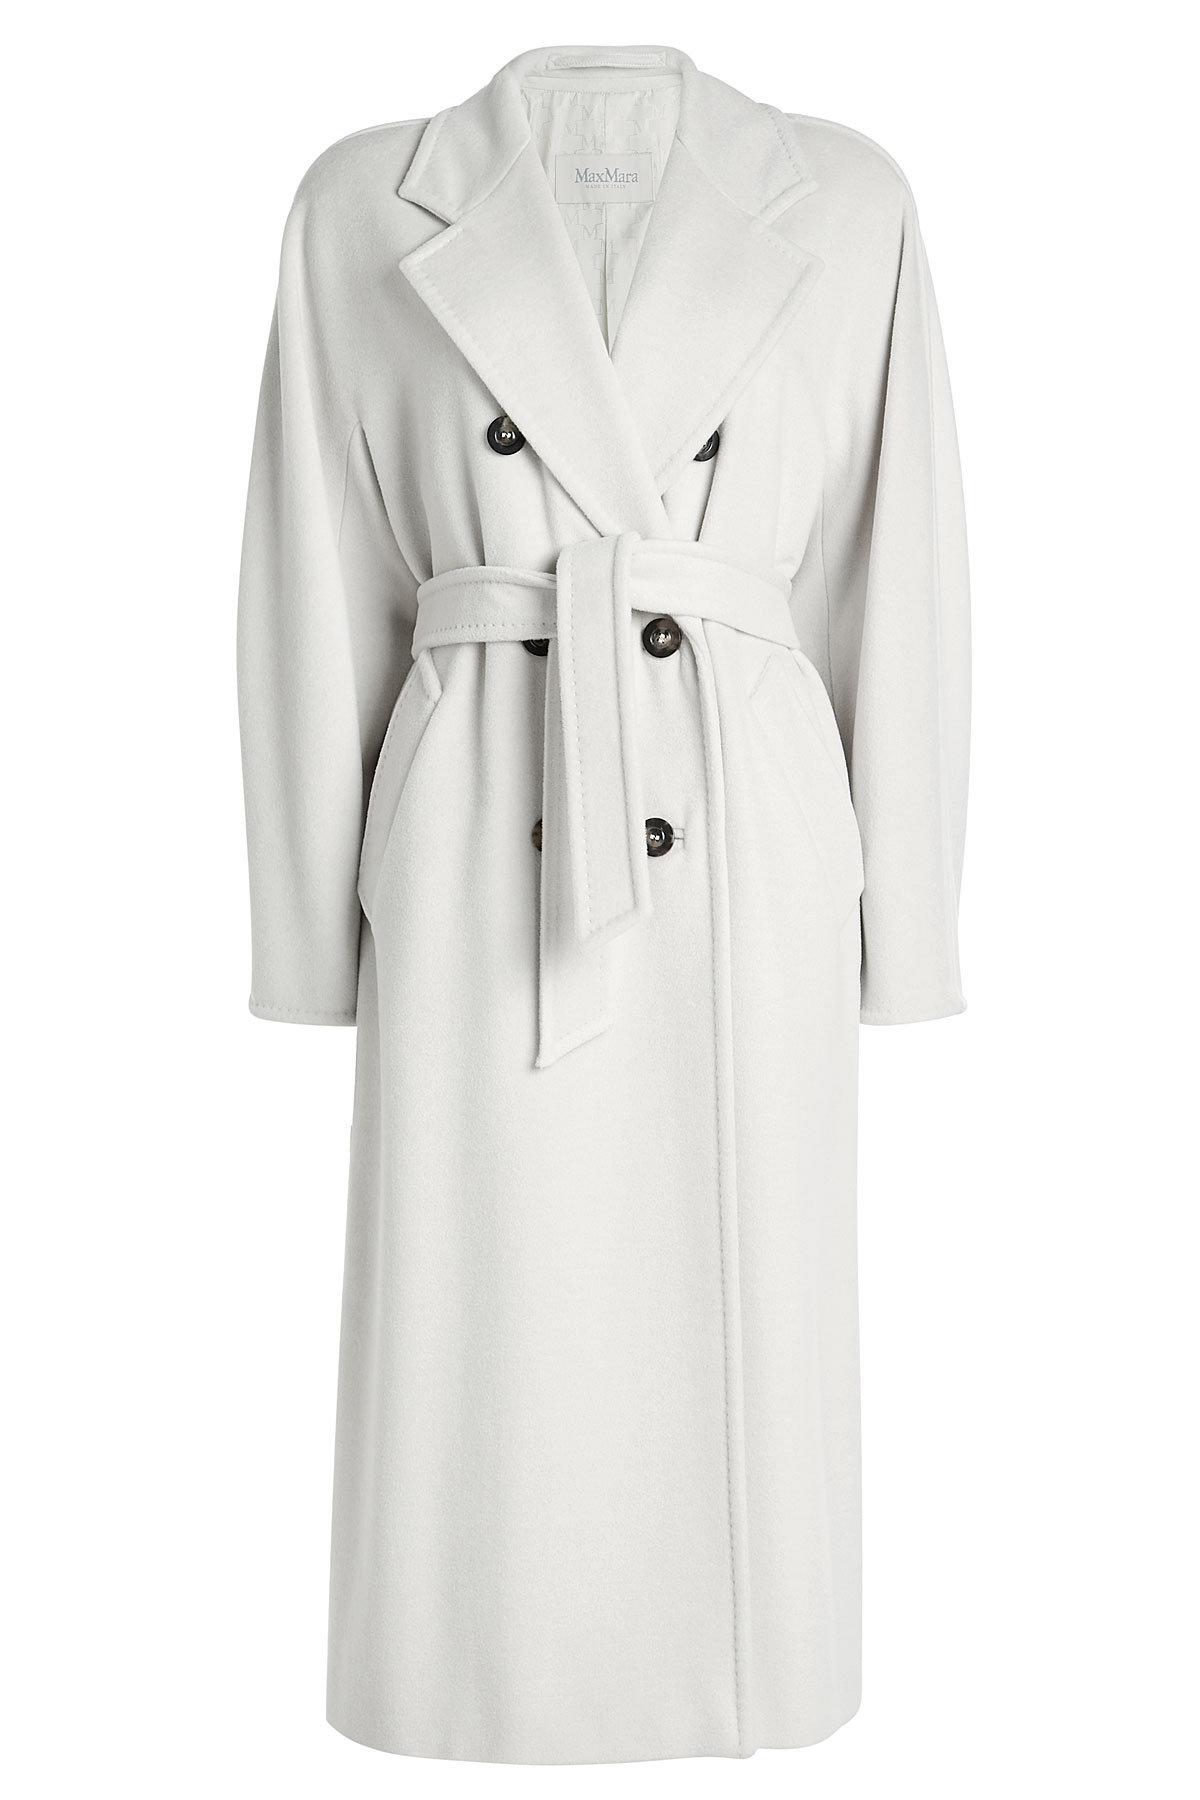 Max Mara Madame Virgin Wool Coat With Cashmere In Grey | ModeSens